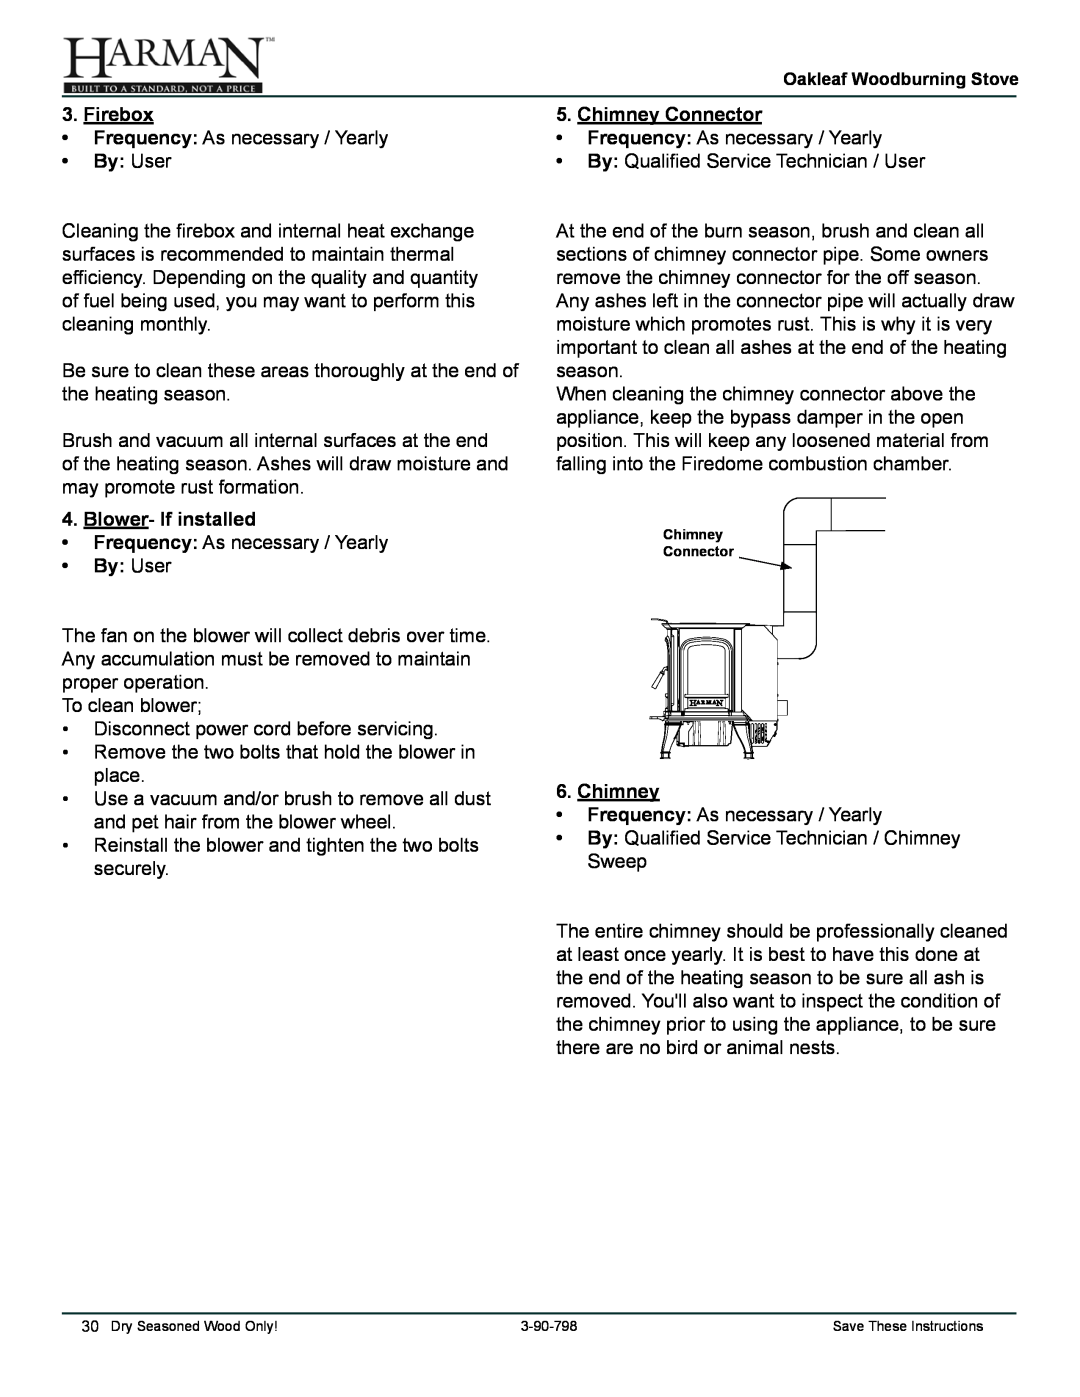 Harman Stove Company 1-90-79700 owner manual Firebox, By User, Blower- If installed, Chimney Connector 